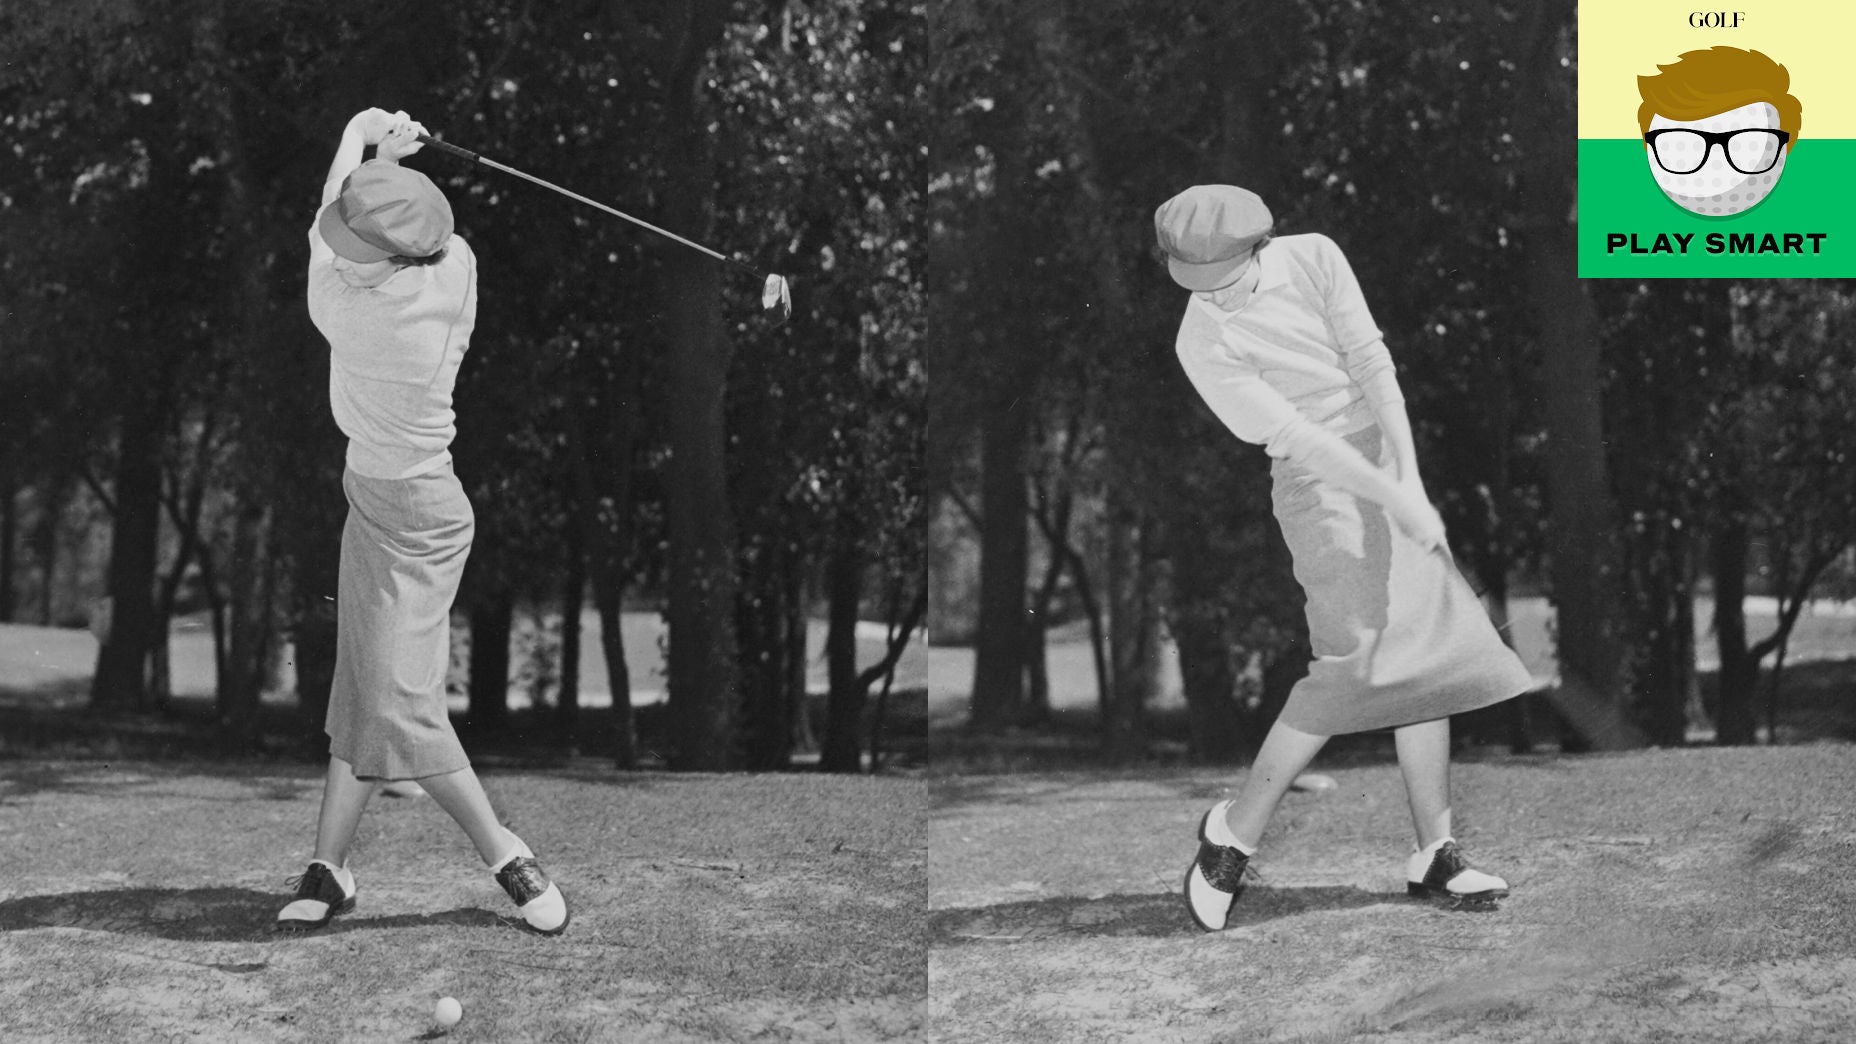 The misunderstanding that has been costing golfers power for generations